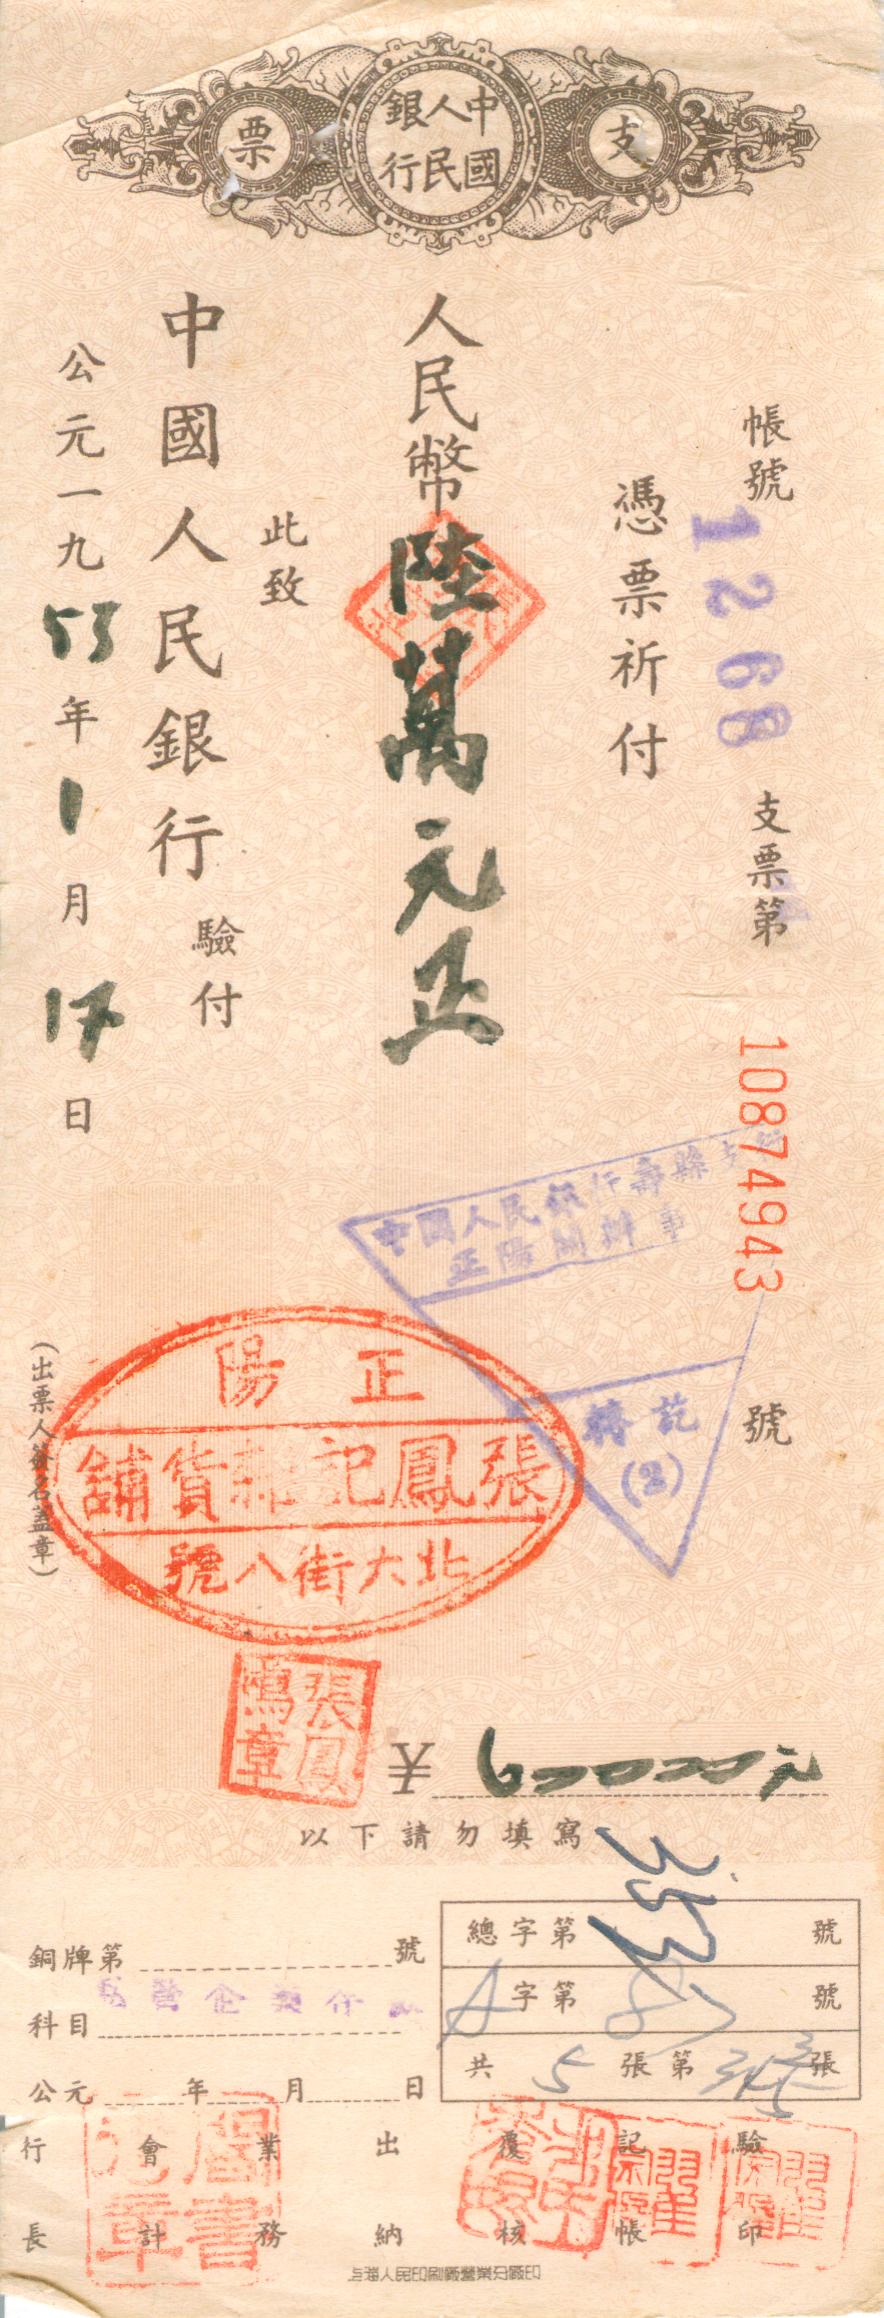 D1105, People's Bank of China, Check Cheque of 1953, Shou County Branch